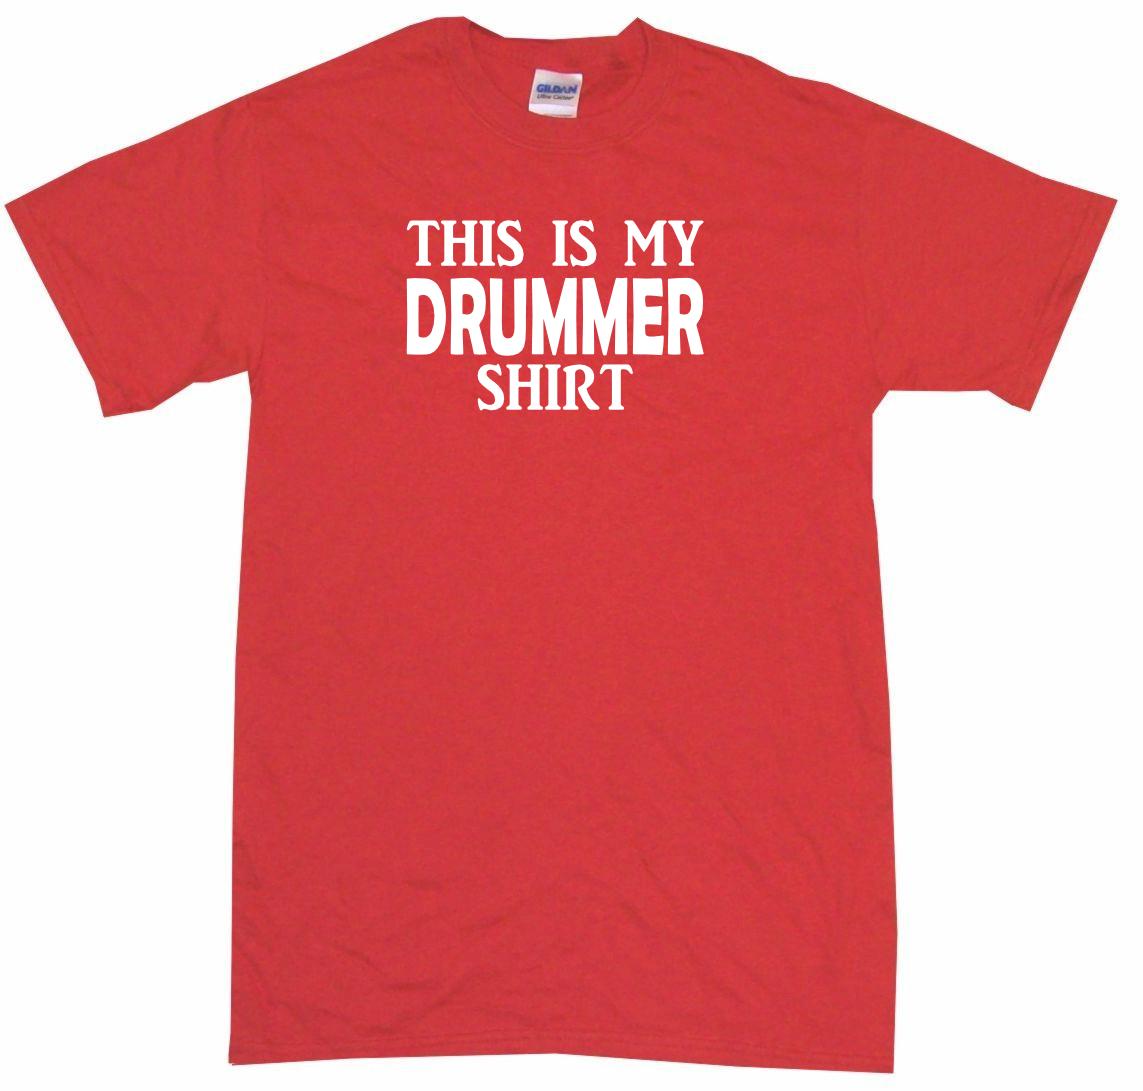 This is My Drummer Shirt Mens Tee Shirt Pick Size Color Small-6XL 